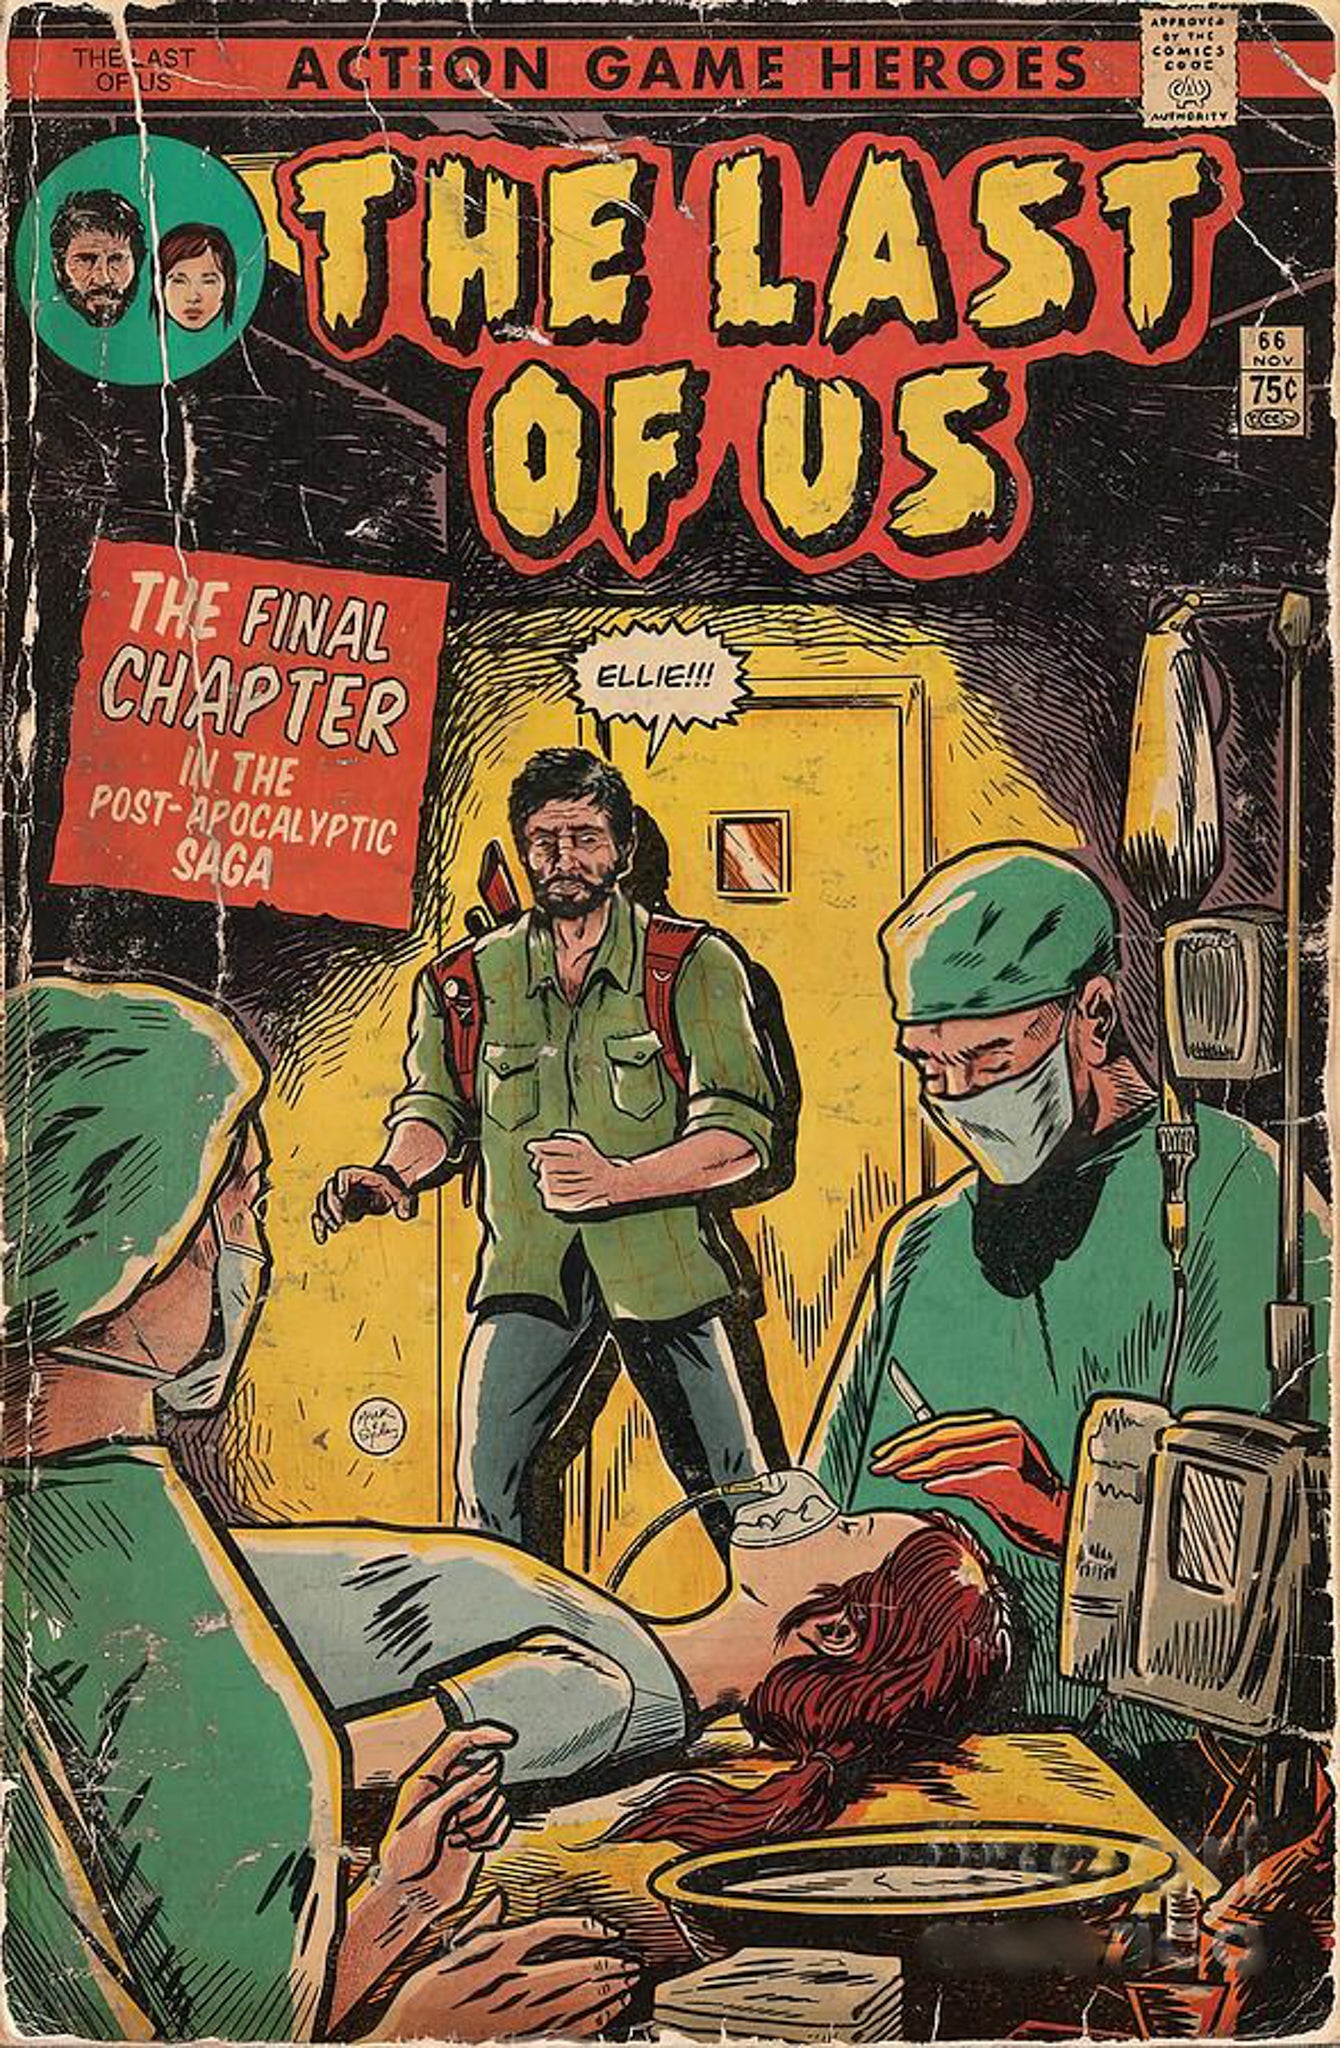 The Last of Us Comic Posters - Retro Covers - Cover 2 / 21x30cm Available at 2Fast2See.co